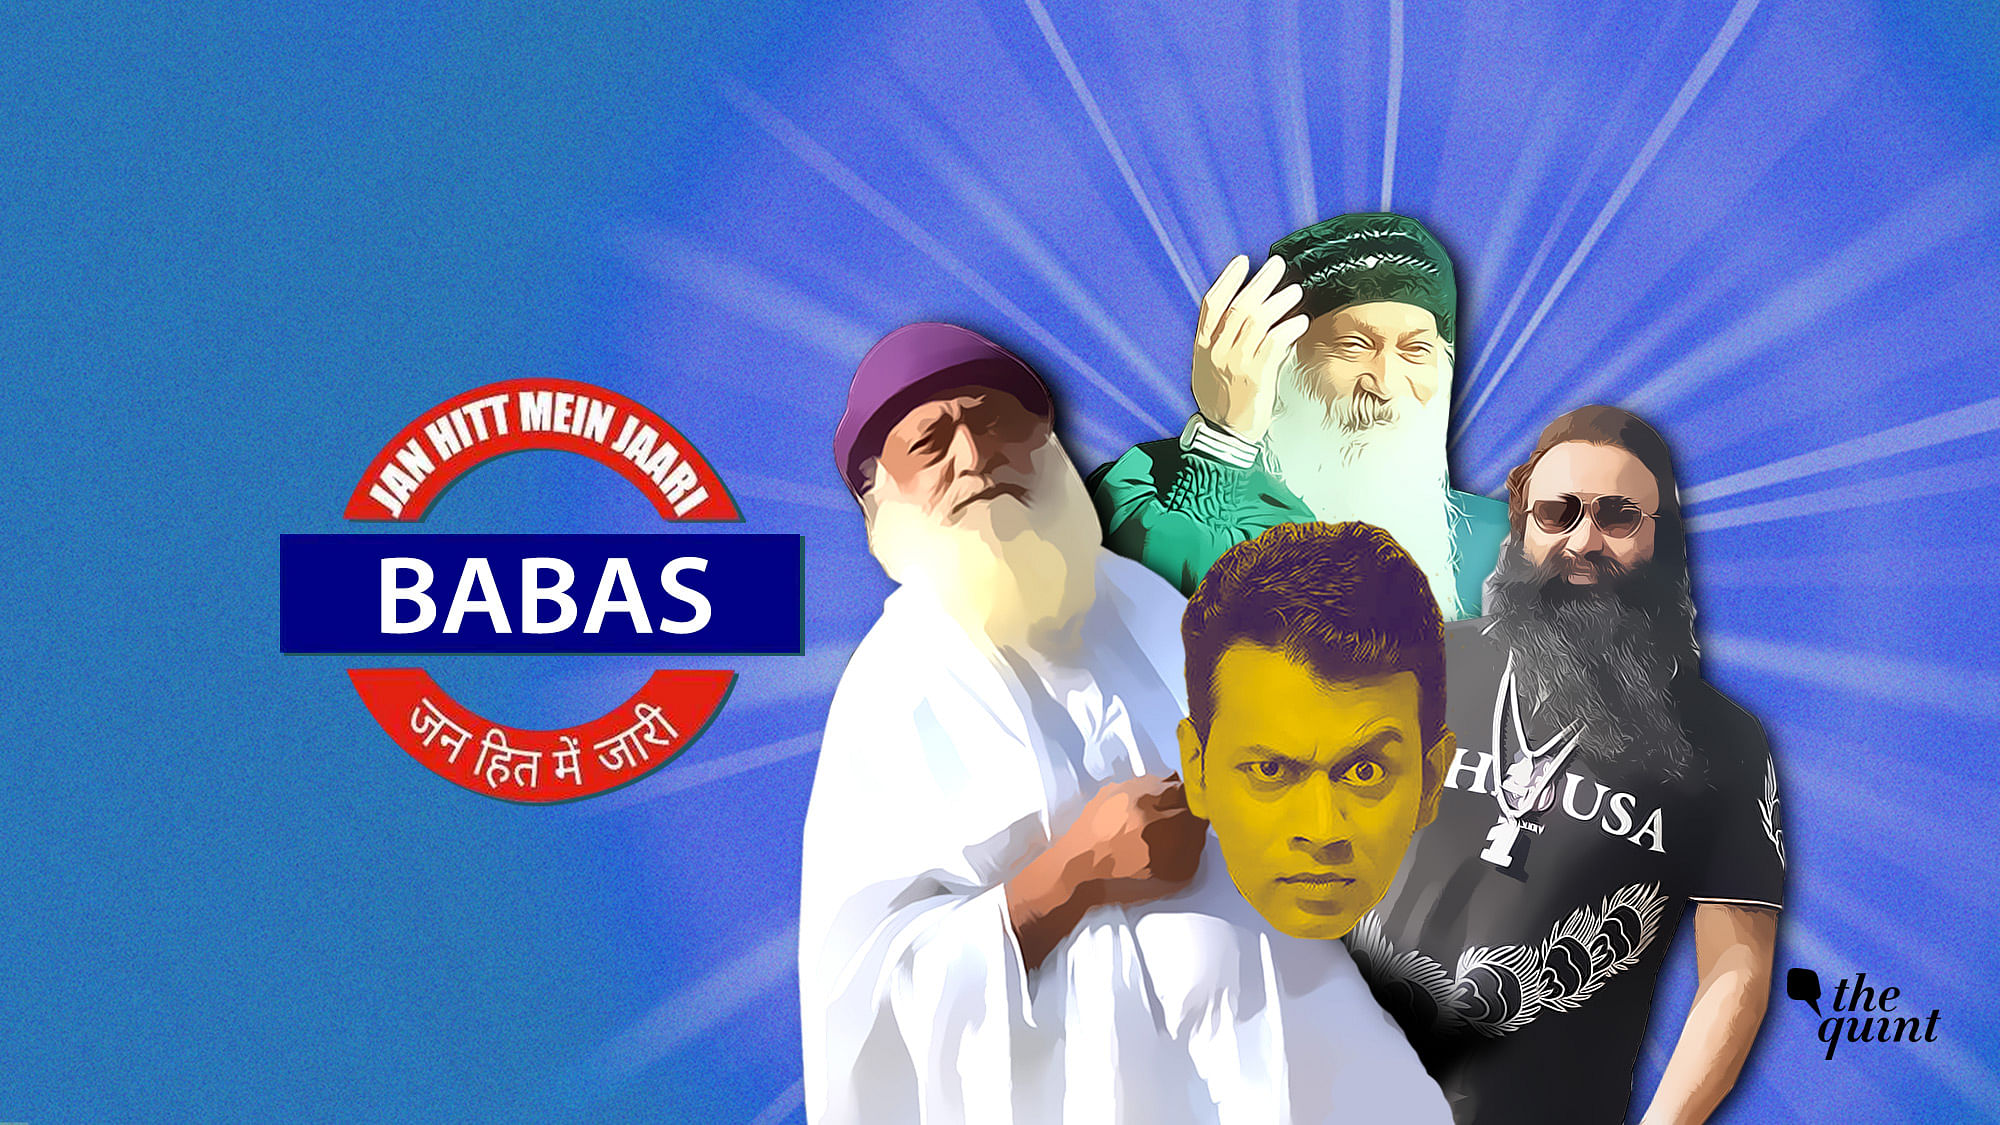 RJ Anant in his newest podcast talks about all the Babas who’ve been caught acting very un-baba-like.